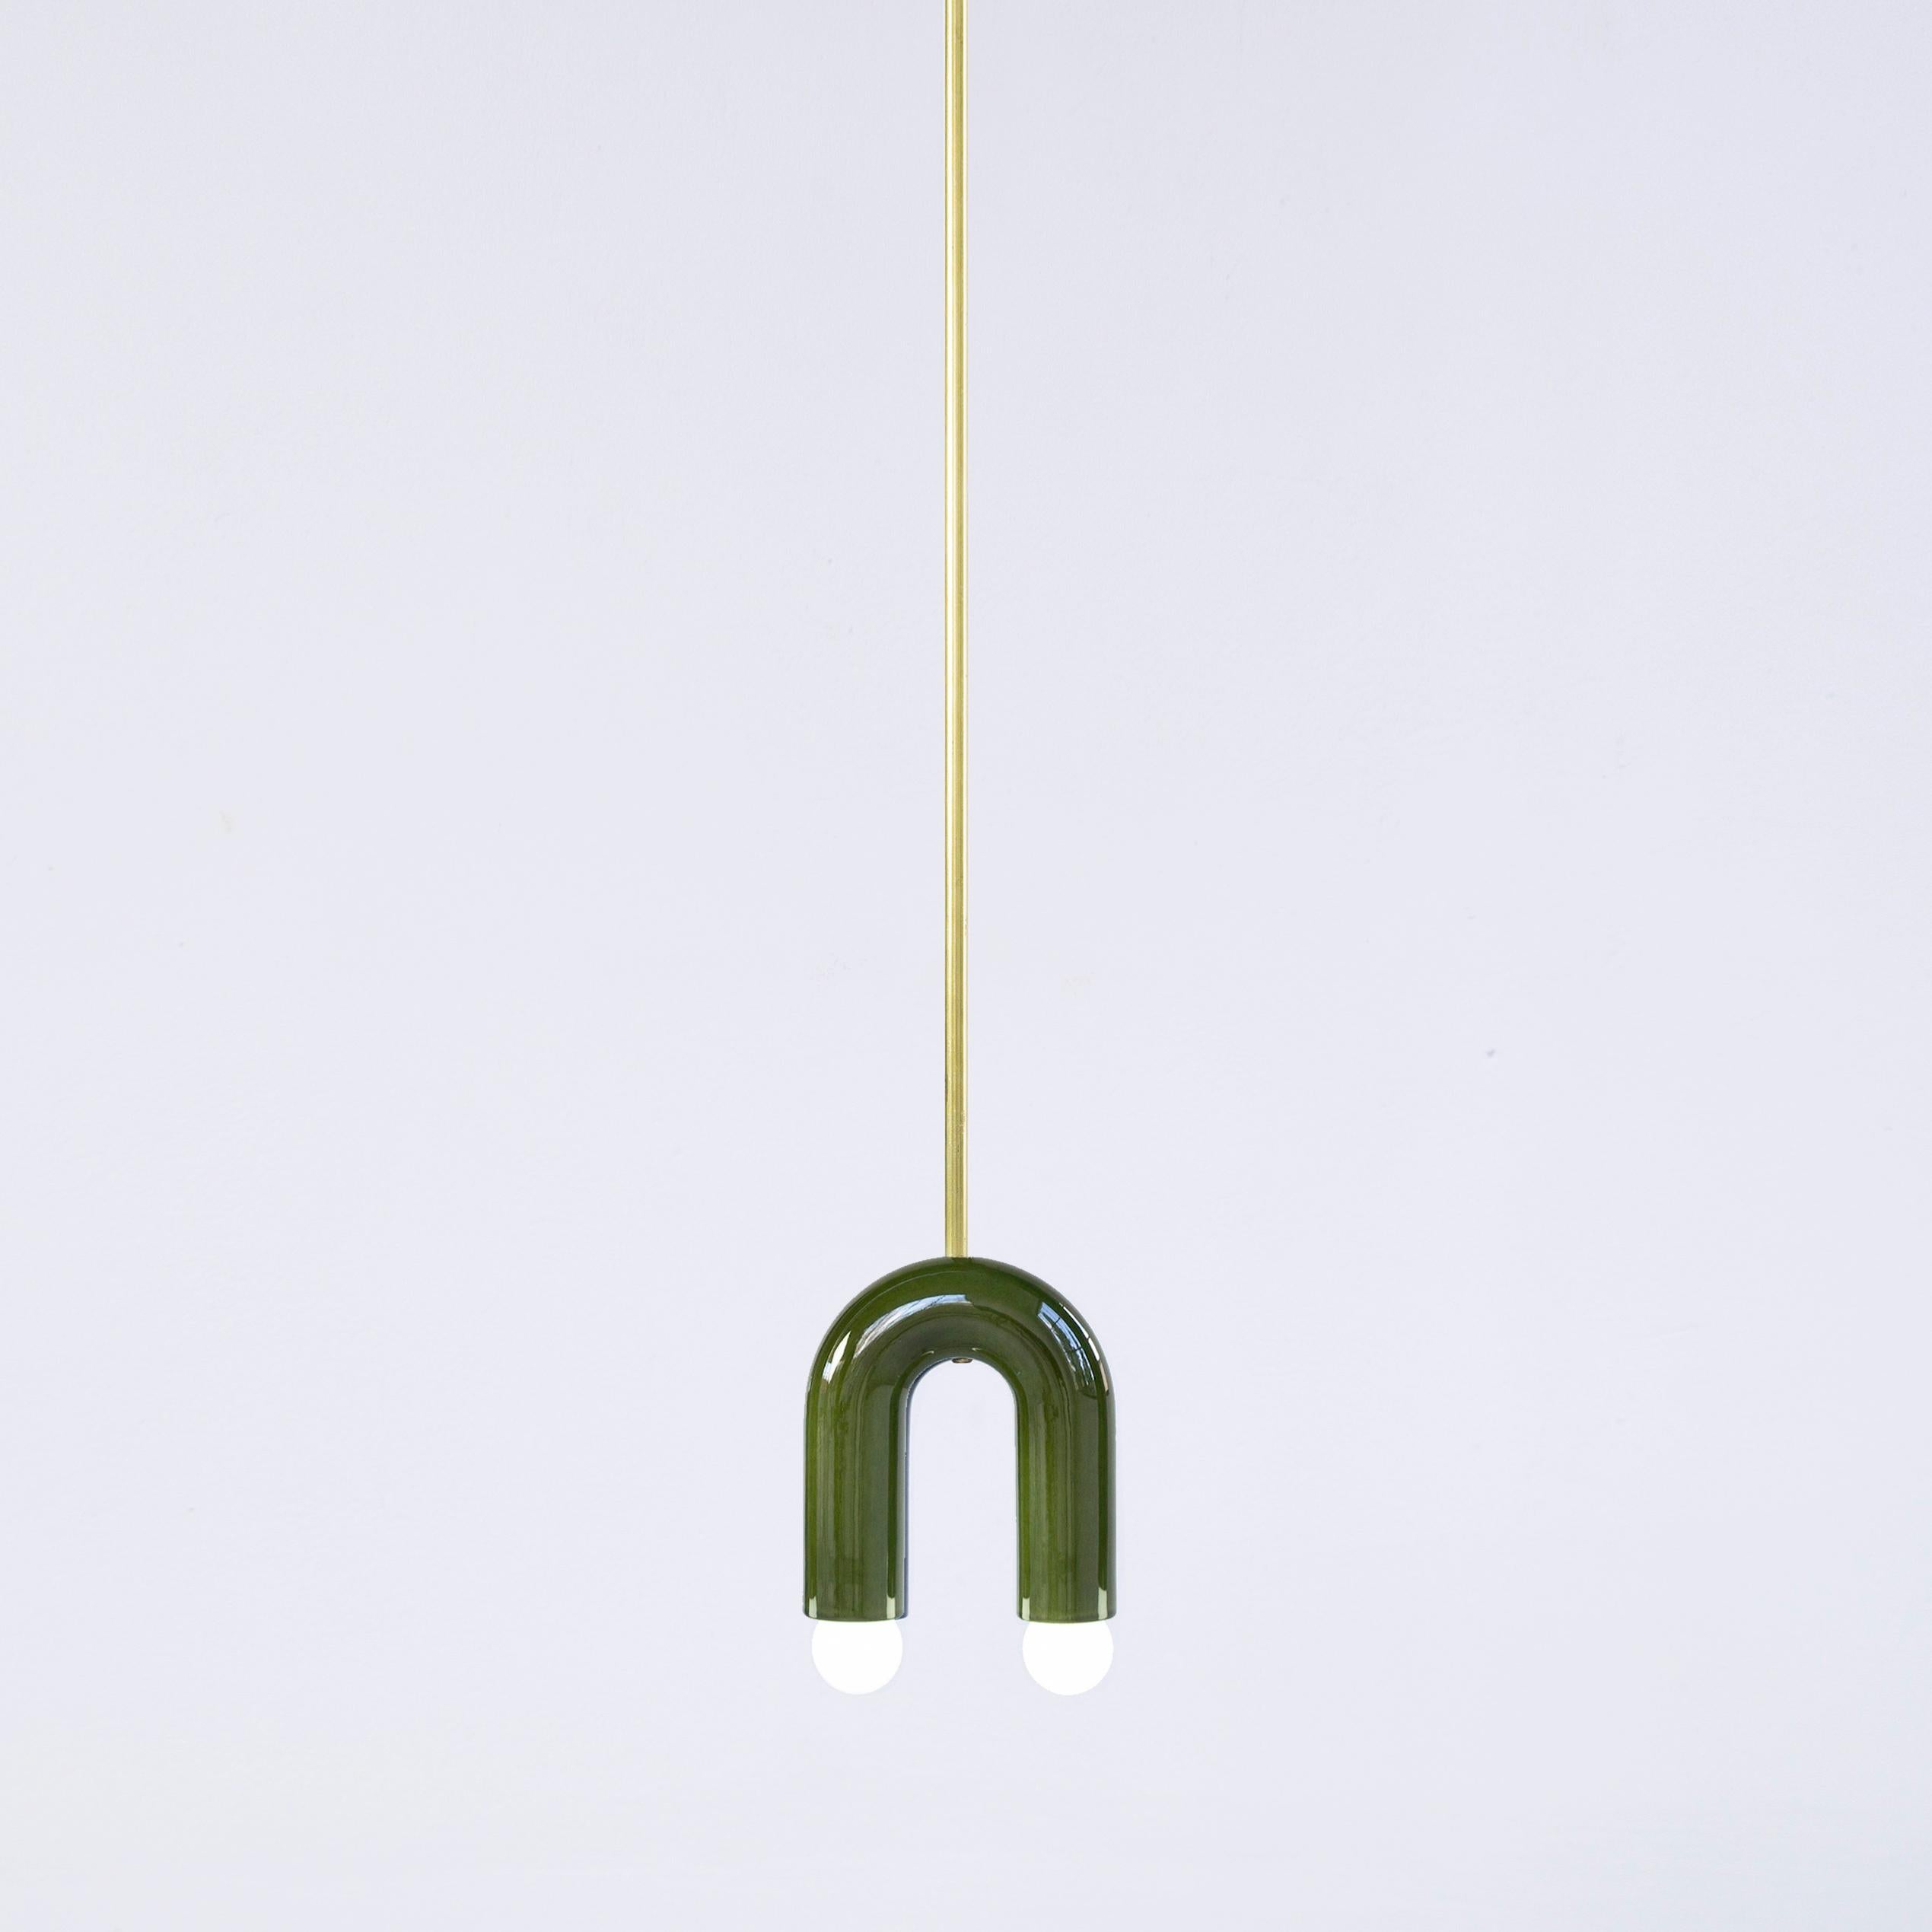 Green TRN A1 pendant lamp by Pani Jurek
Dimensions: D 5 x W 15 x H 18 cm 
Material: ceramic and brass.
Available in other colors.
Lamps from the TRN collection hang on a metal tube, not on a cable. This allows the lamp to be mounted in a specific